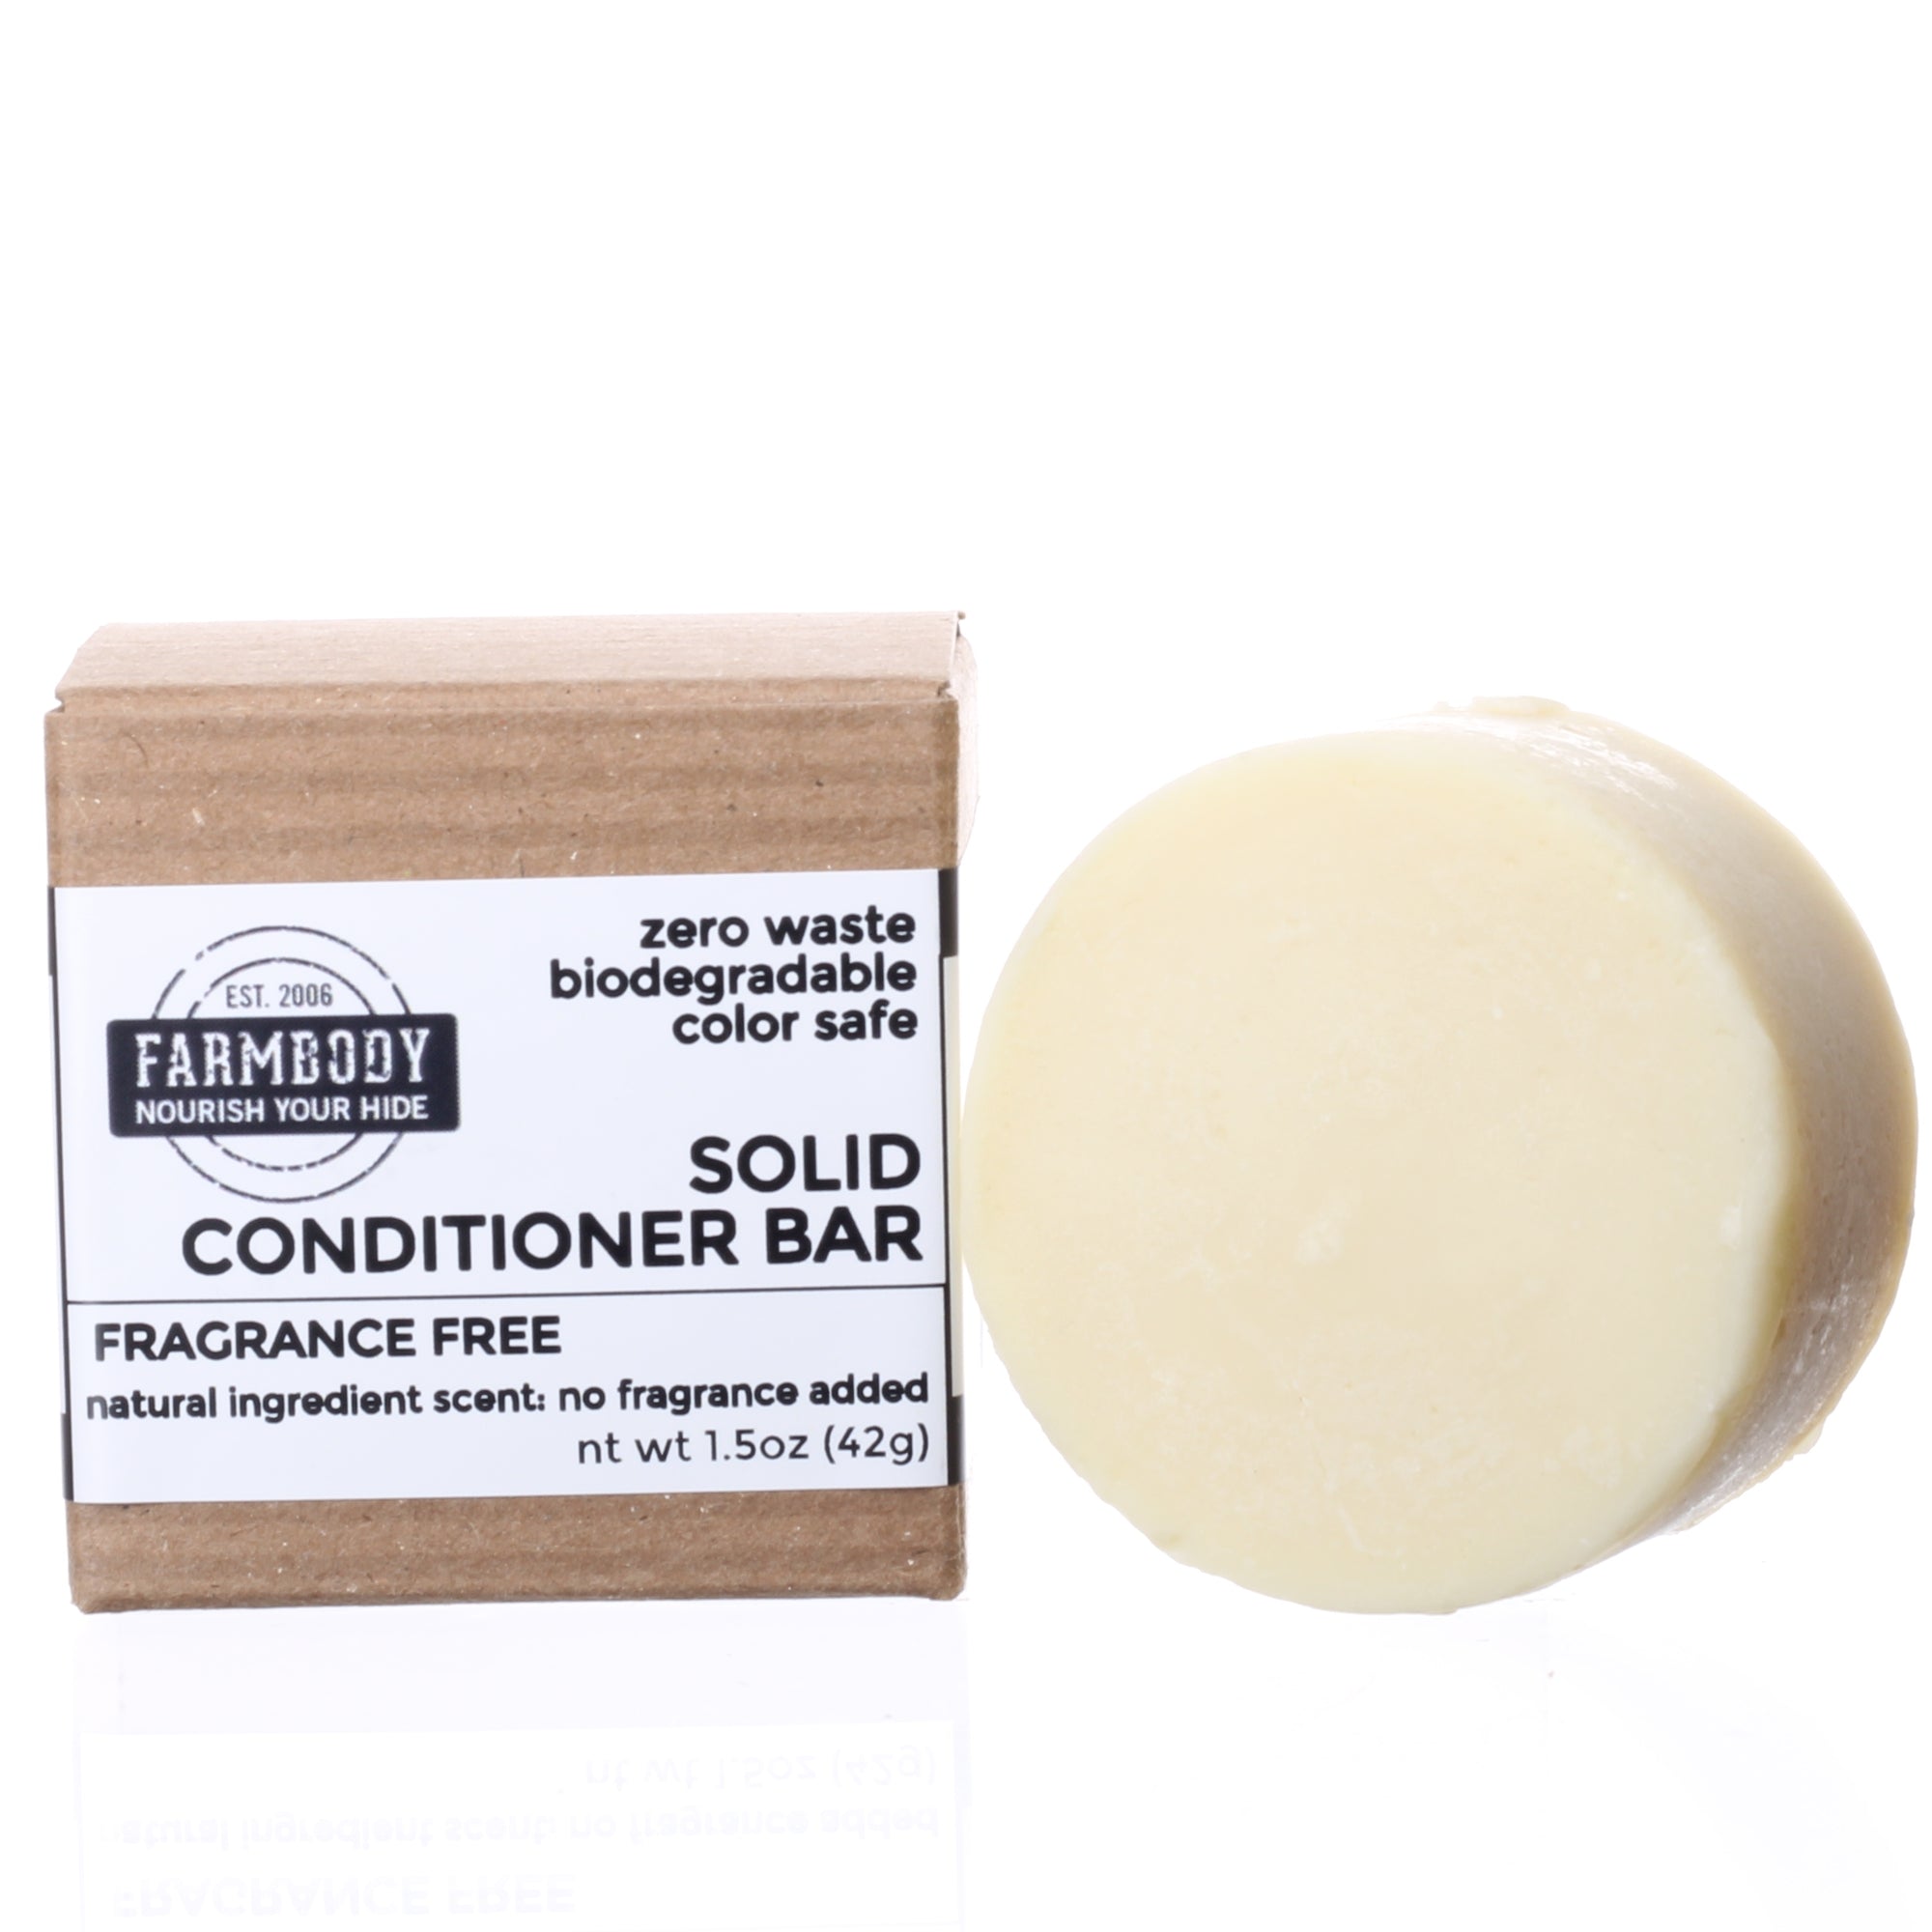 Farmbody solid conditioner bar in fragrance free natural ingredient scent no fragrance added